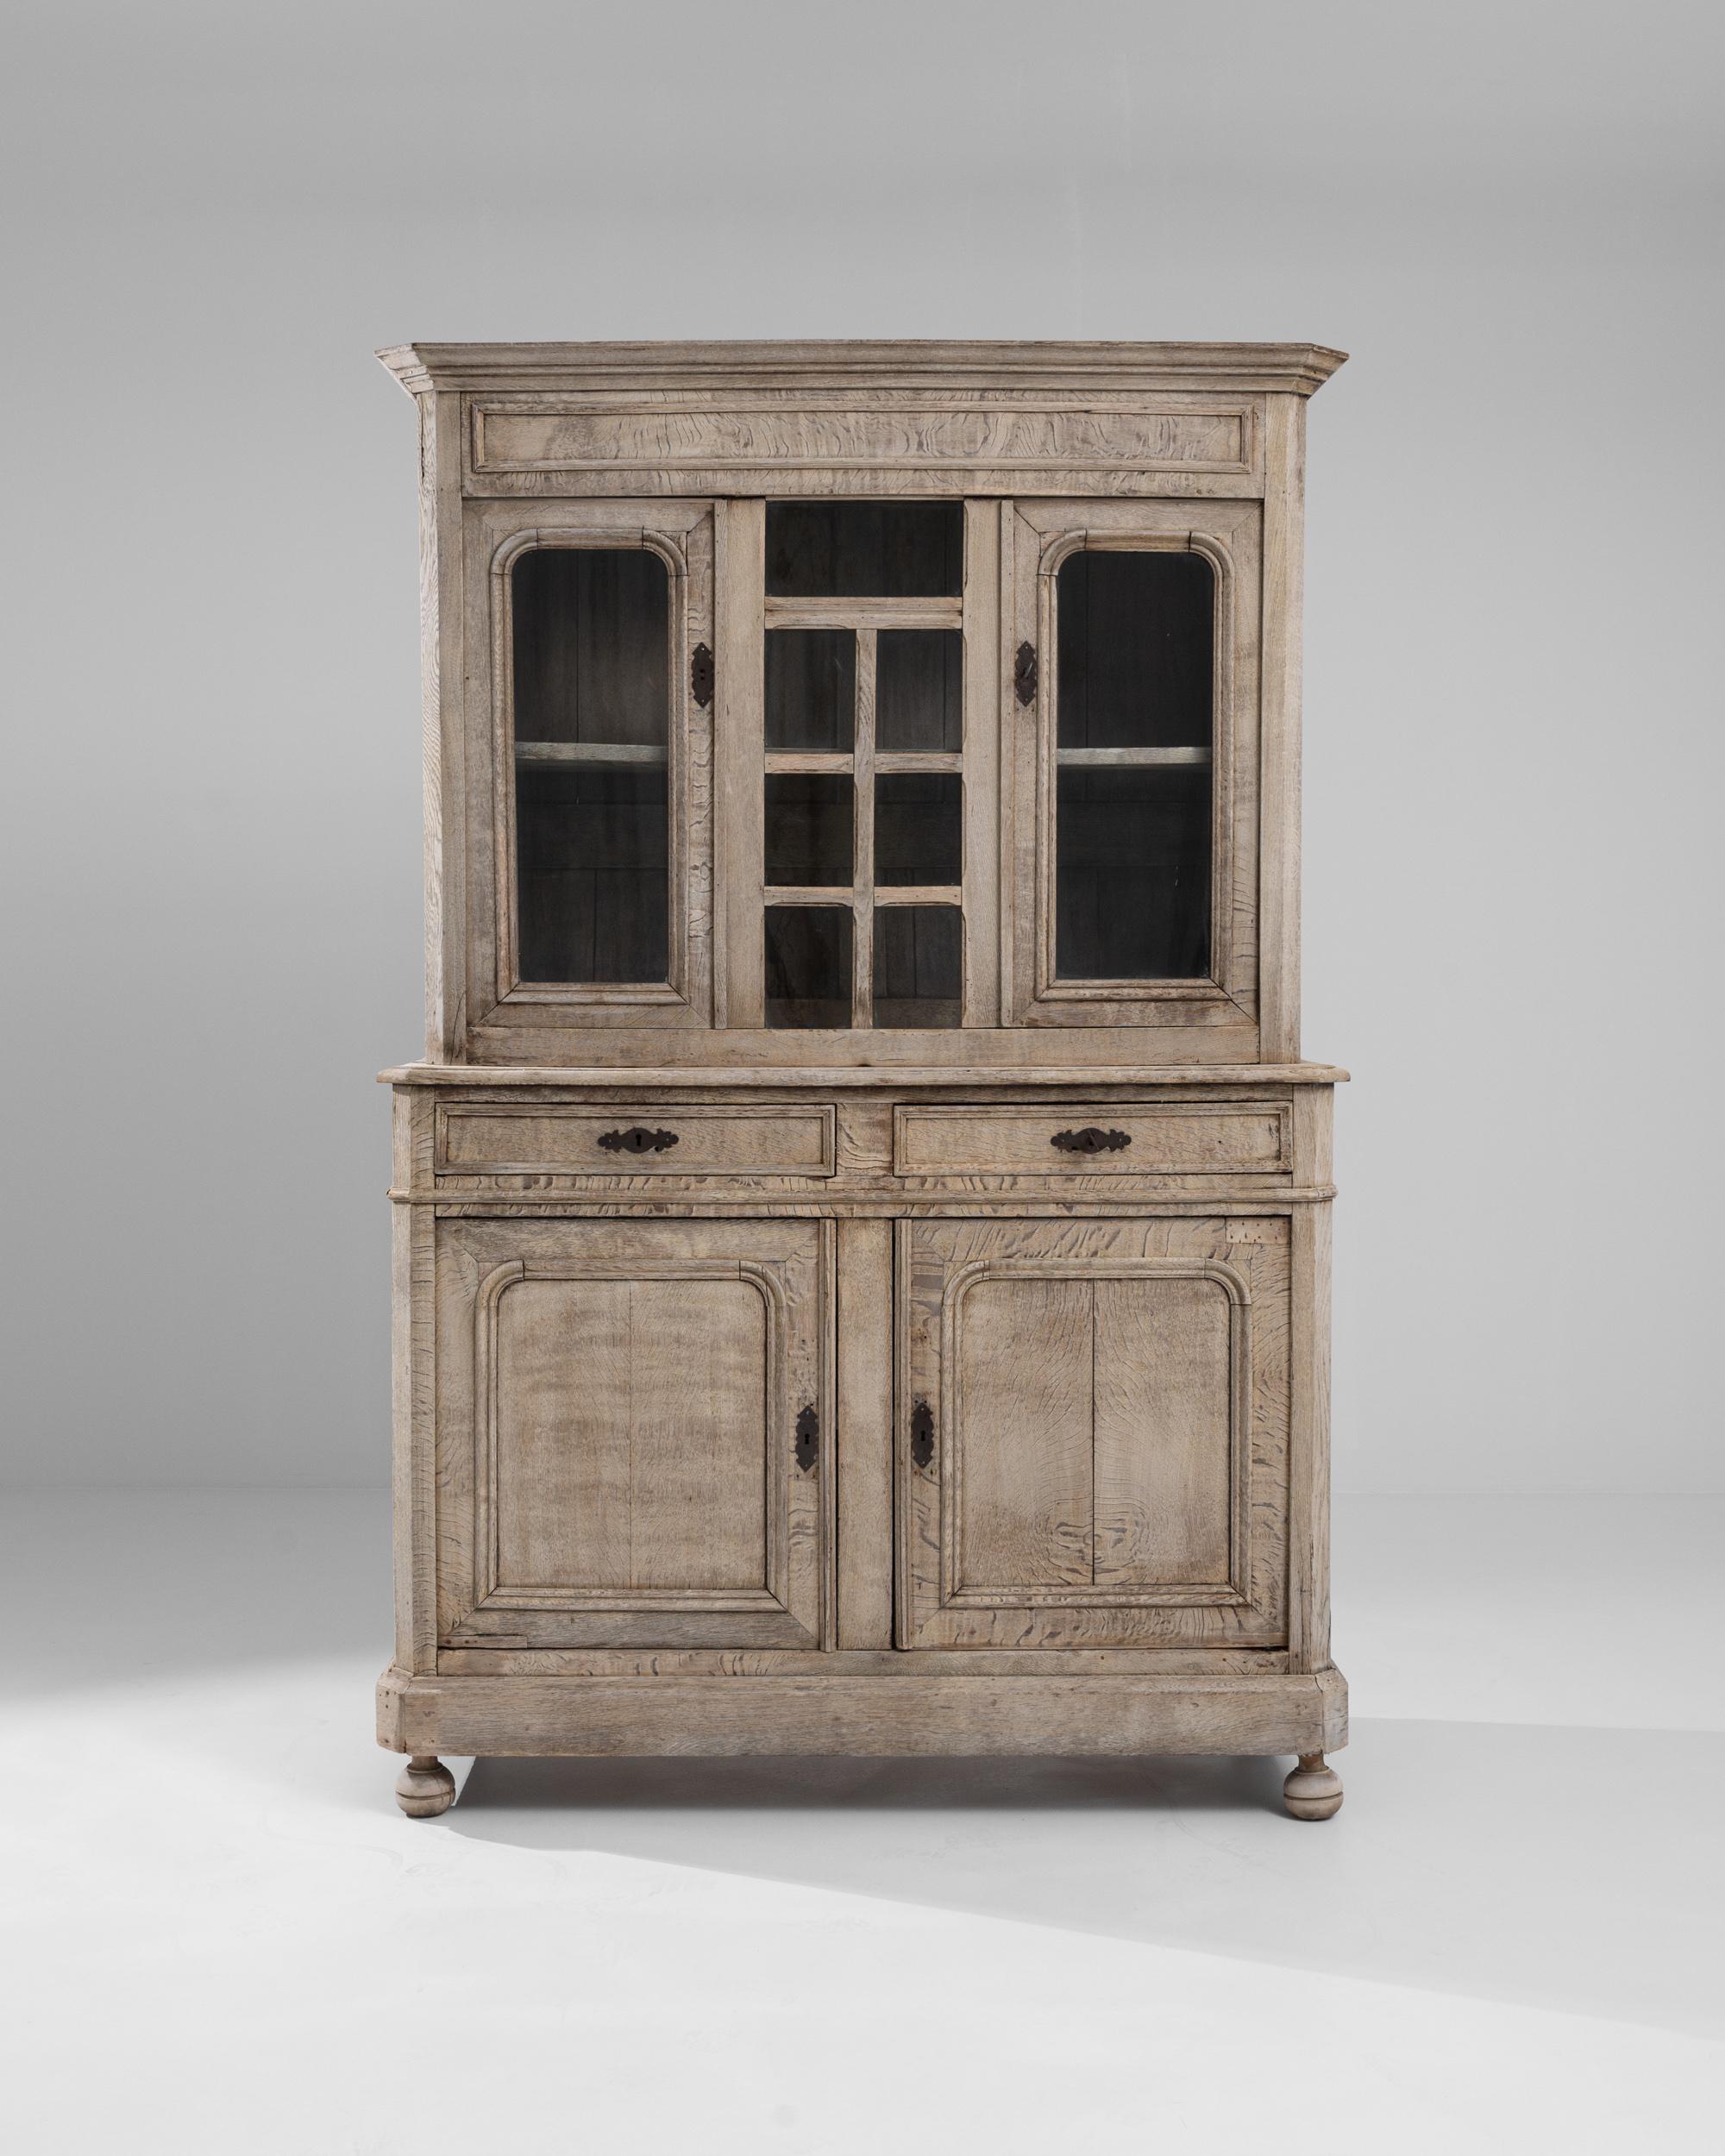 A wooden vitrine from 19th century Belgium. Fit with two upper display cabinets and two lower storage compartments, drawers slide in between, this vitrine boasts elegant design and is brimming with function. Its natural, wood grain-striped surface